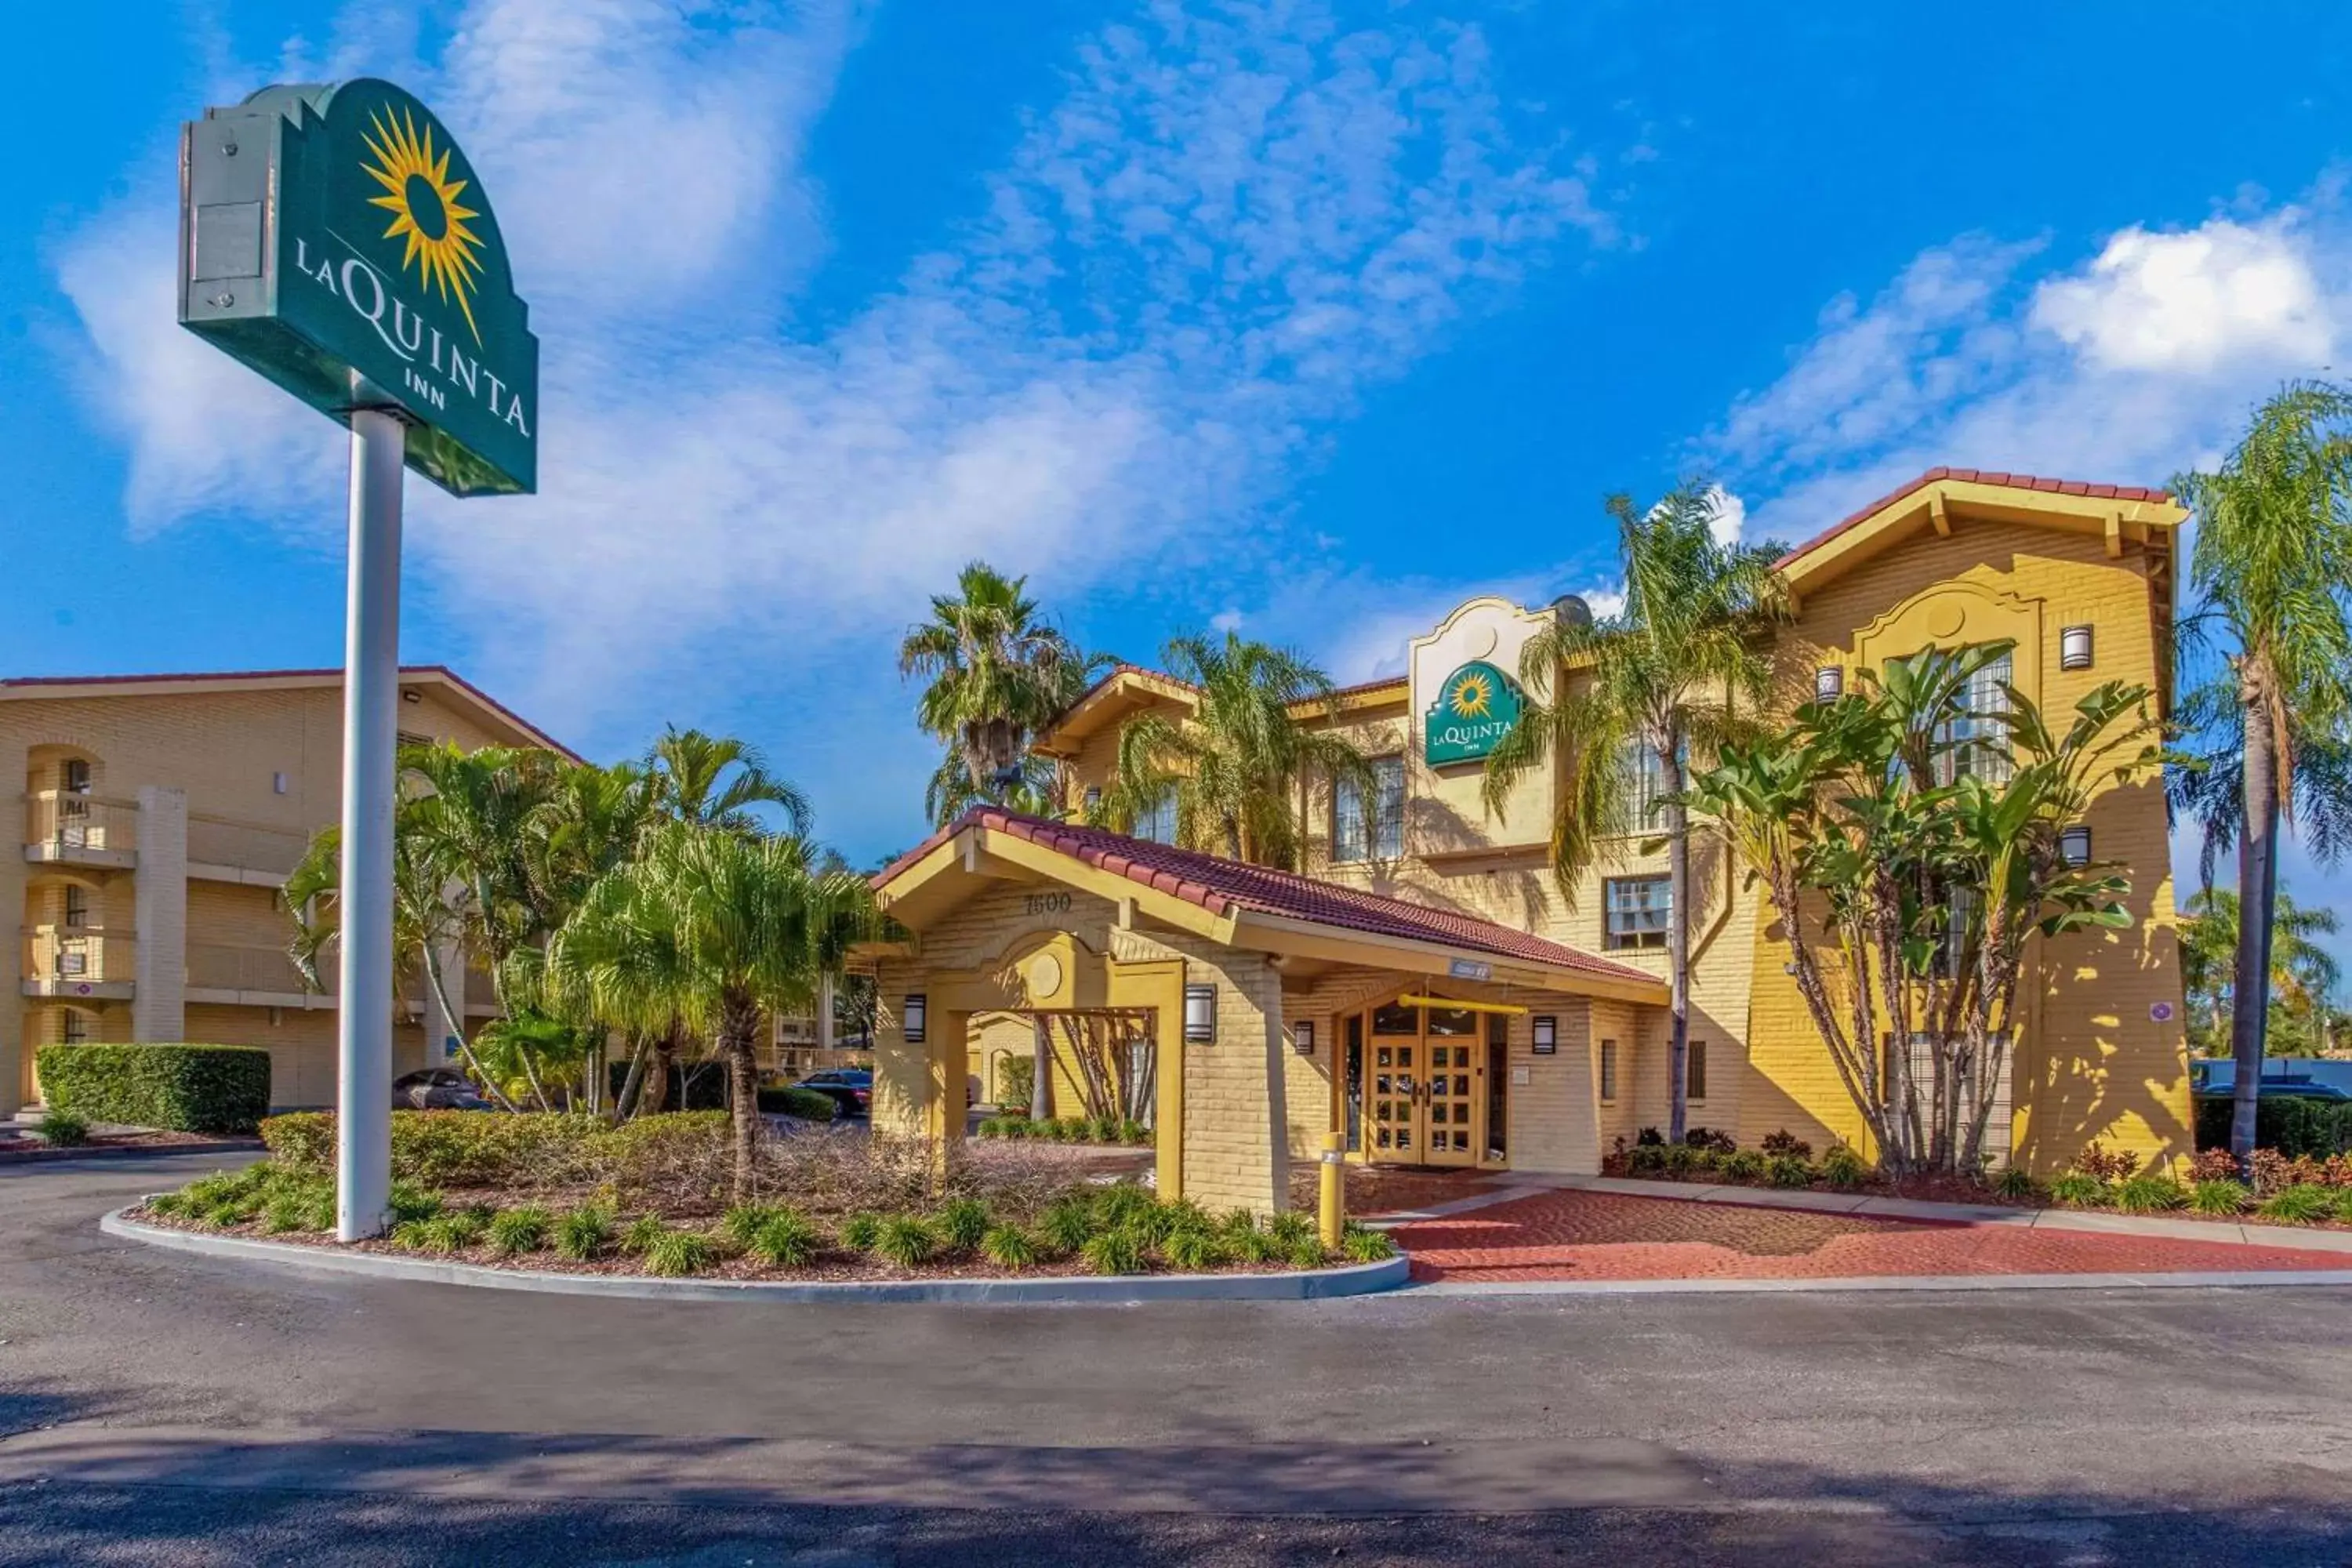 Property Building in La Quinta Inn by Wyndham Tampa Bay Pinellas Park Clearwater